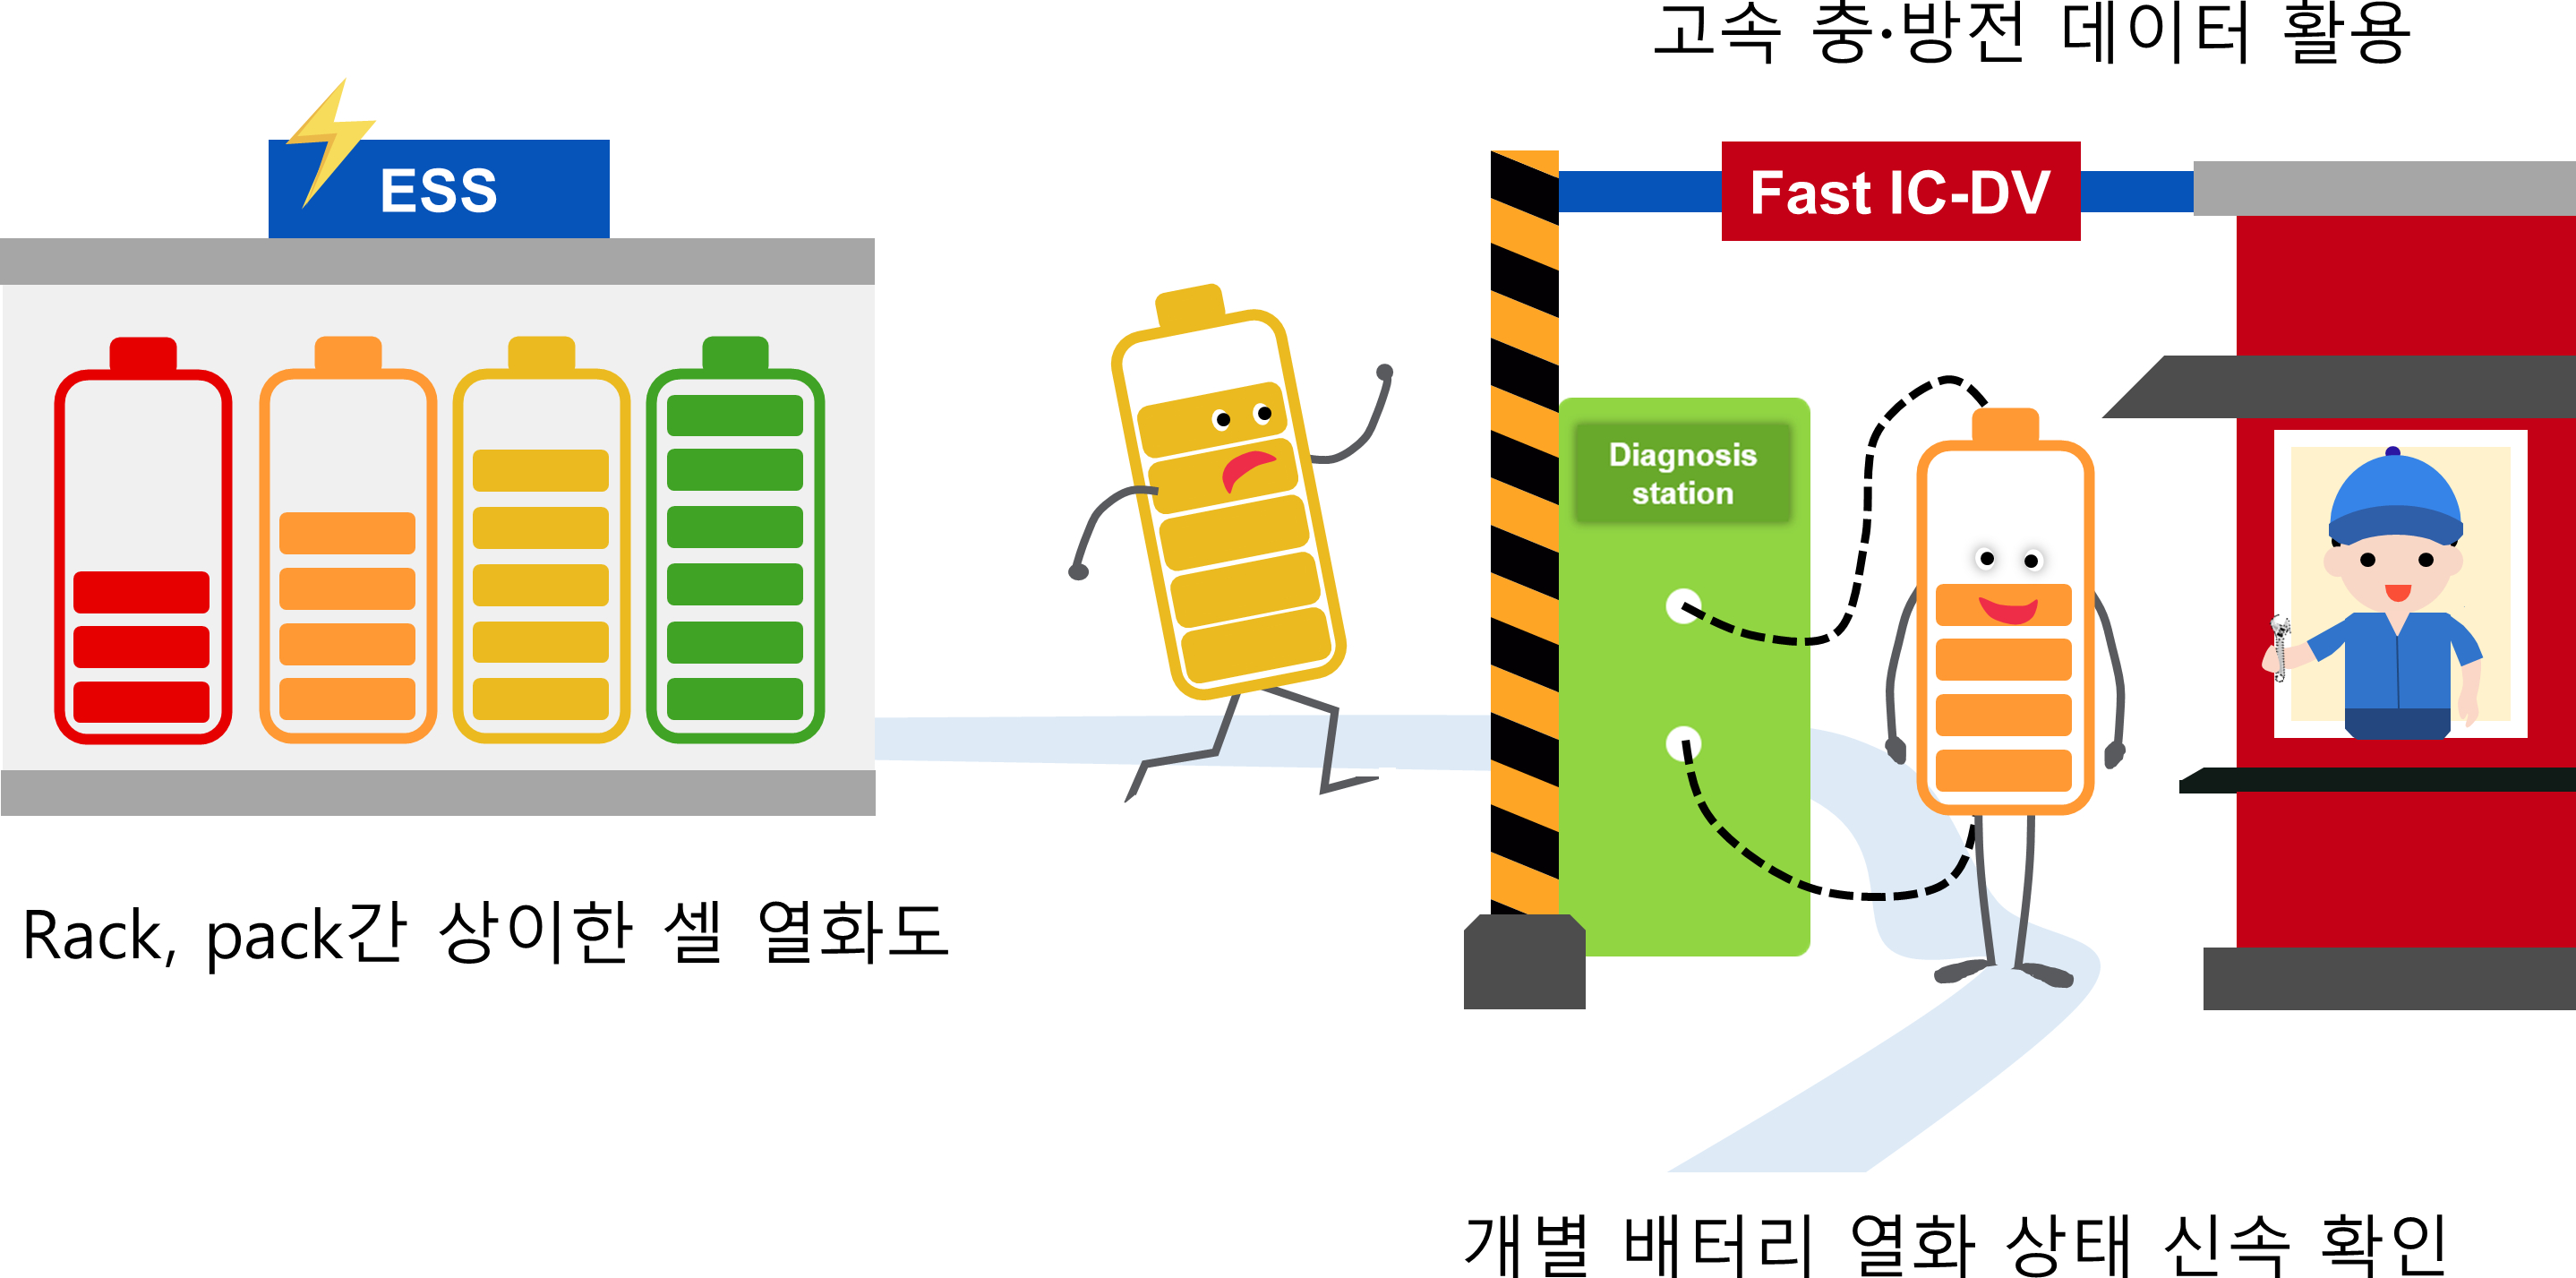 School of Earth Sciences and Environmental Engineering Professor Jae-Young Lee's joint research team develops technology to quickly and easily diagnose battery deterioration after use 이미지